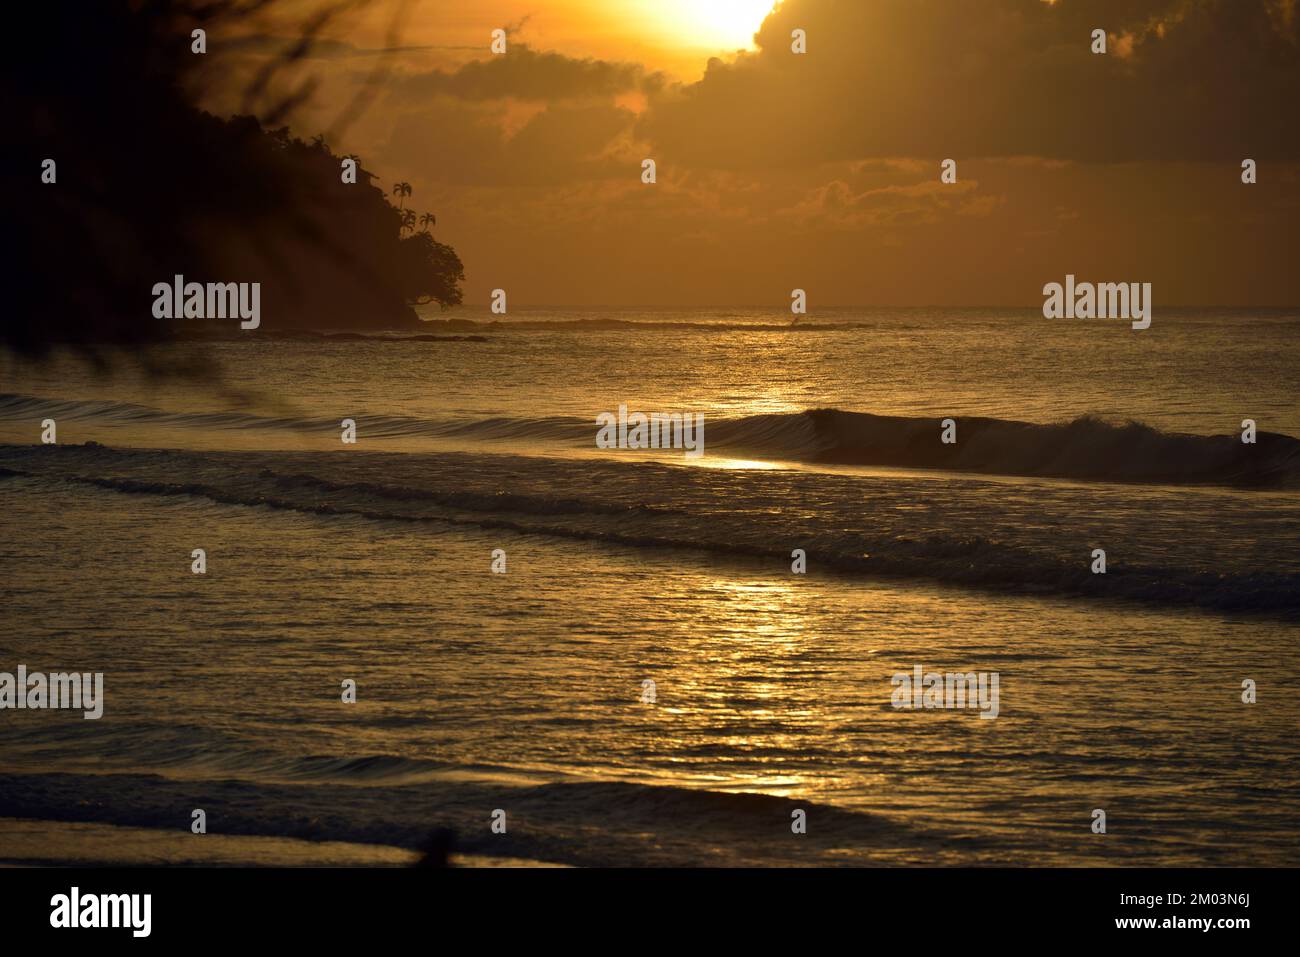 Sunset over the beach at the Tip of Borneo, Sabah, Malaysia. Stock Photo